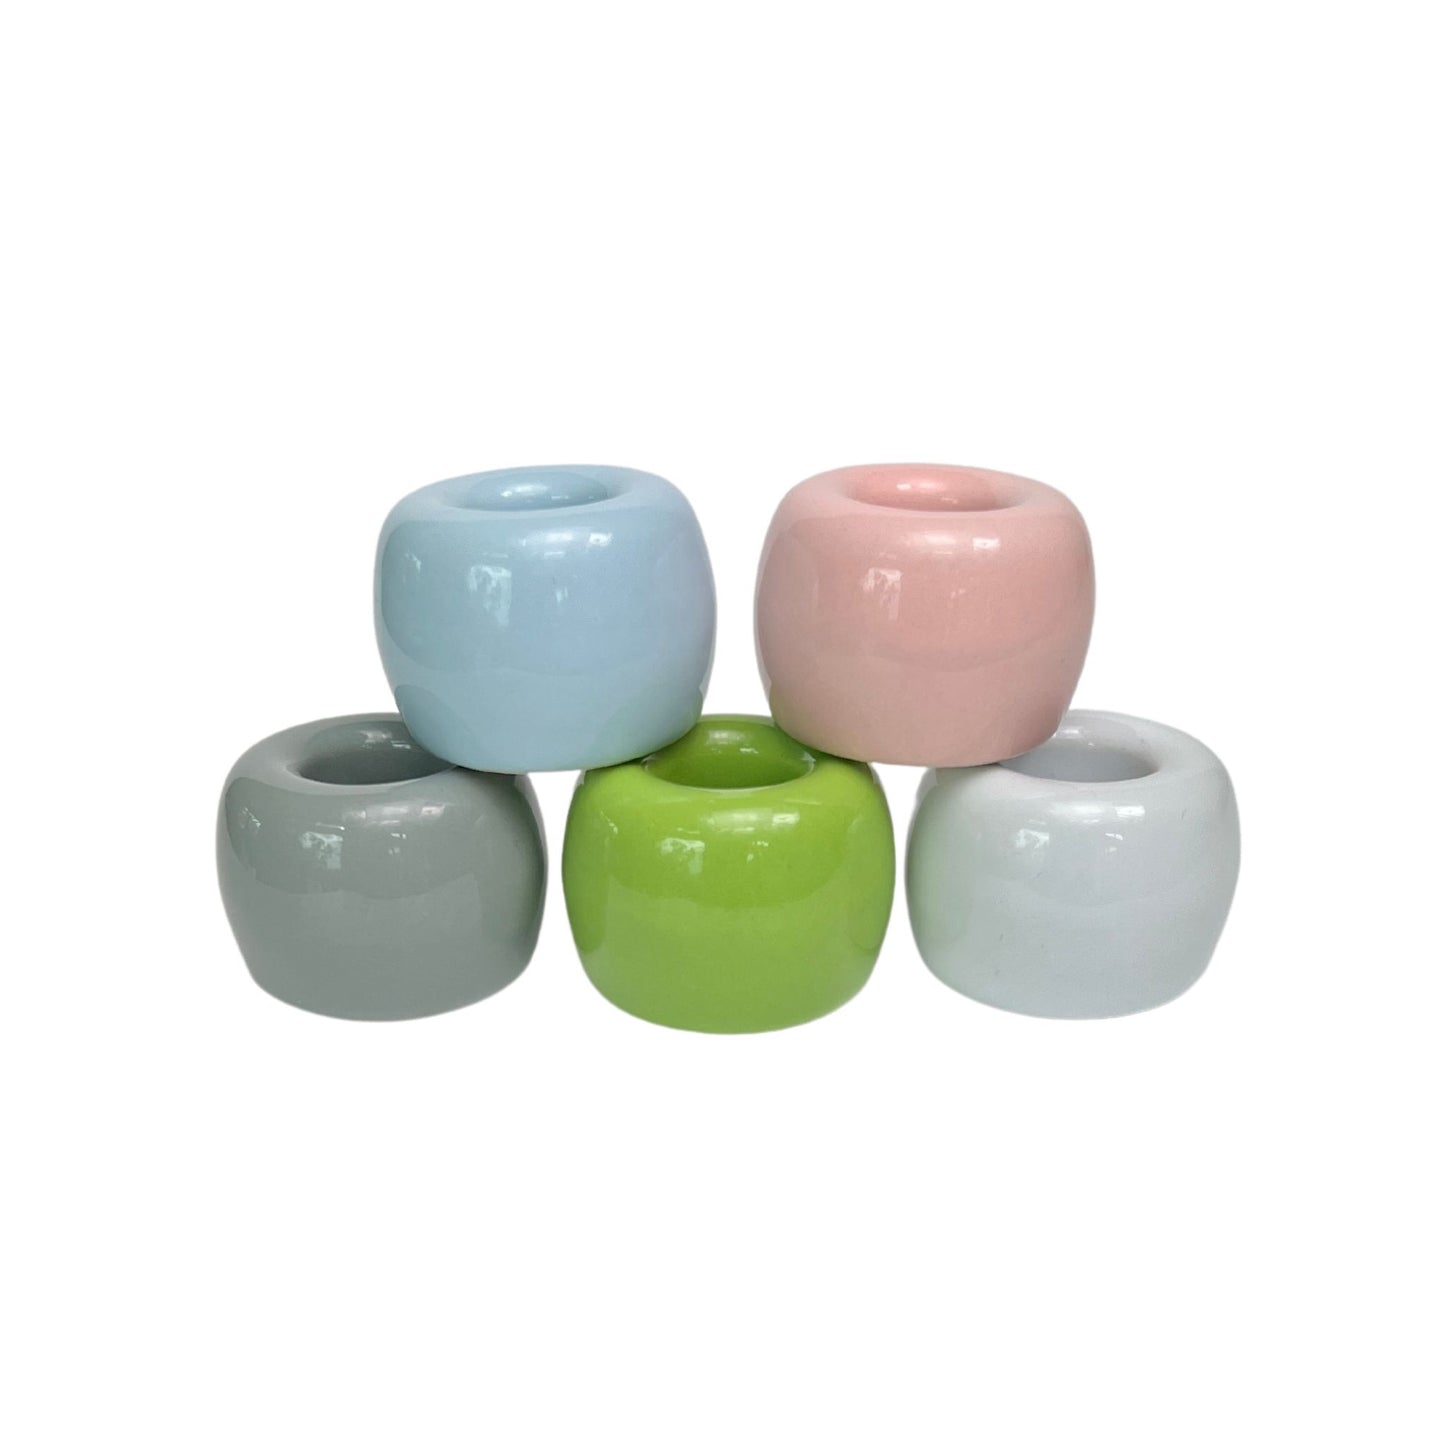 collection of 5 small ceramic toothbrush holders in glossy blue, grey, white, pink and white finishes